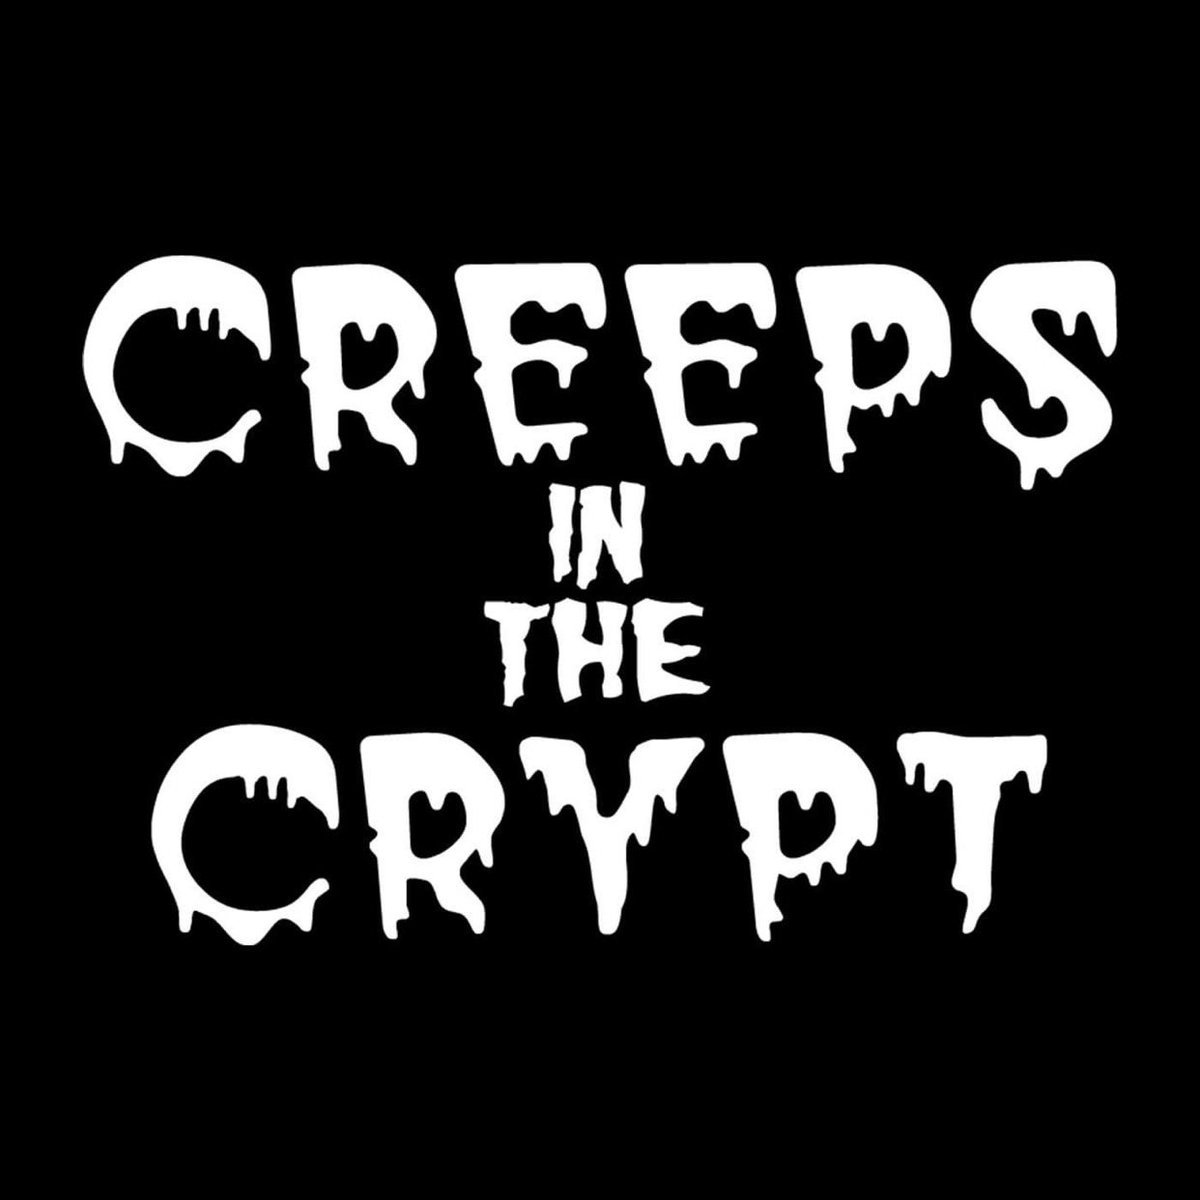 Hey Creeps, We have a special episode coming out this Friday featuring the boys from @MurphysPodcast for this week since #HurricaneIdalia messed up our recording schedule! Break out your best tinfoil for this one! beacons.ai/creepsinthecry…